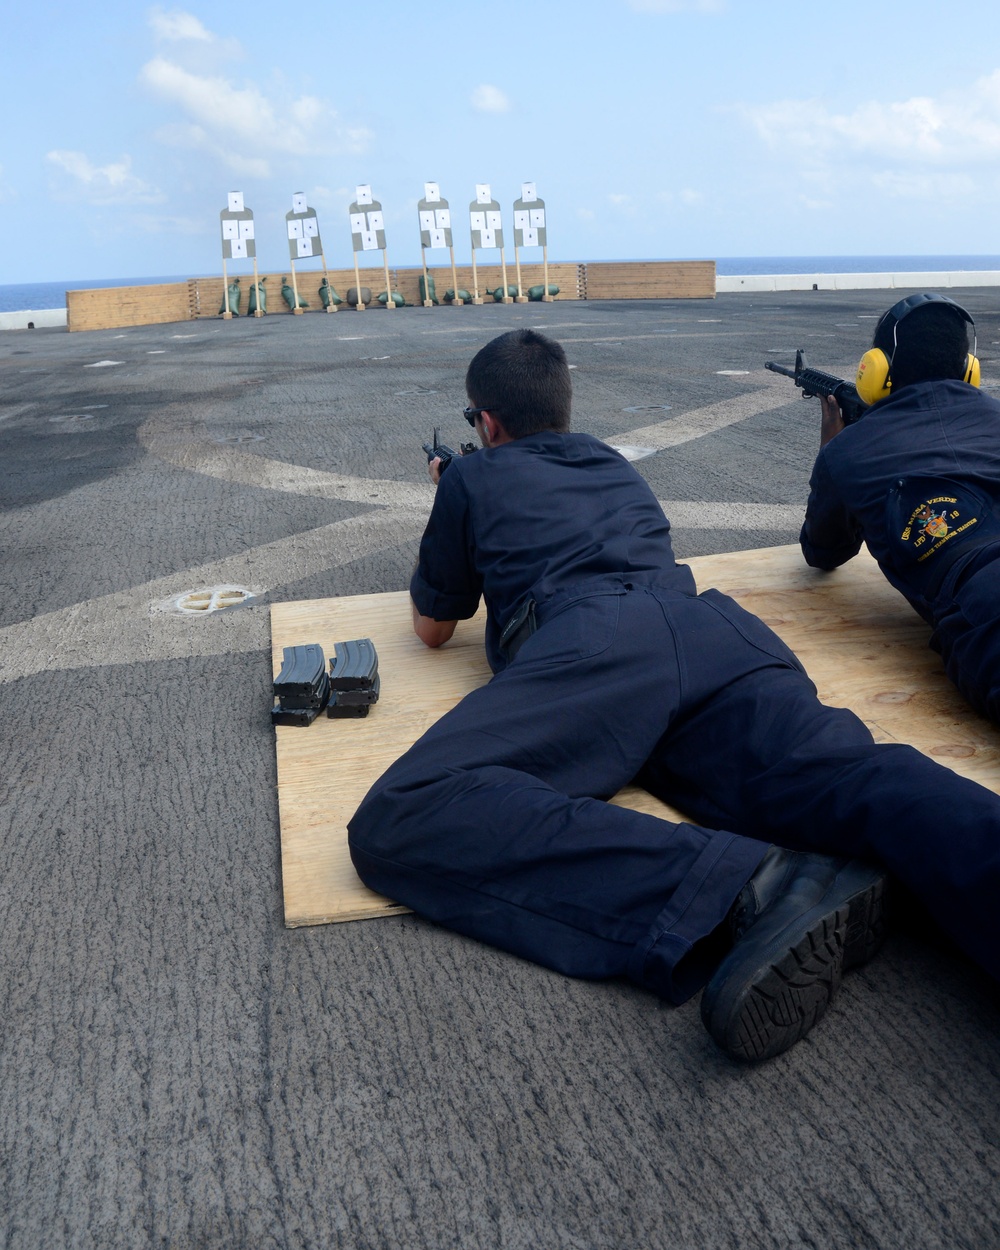 Small arms, live-fire exercis